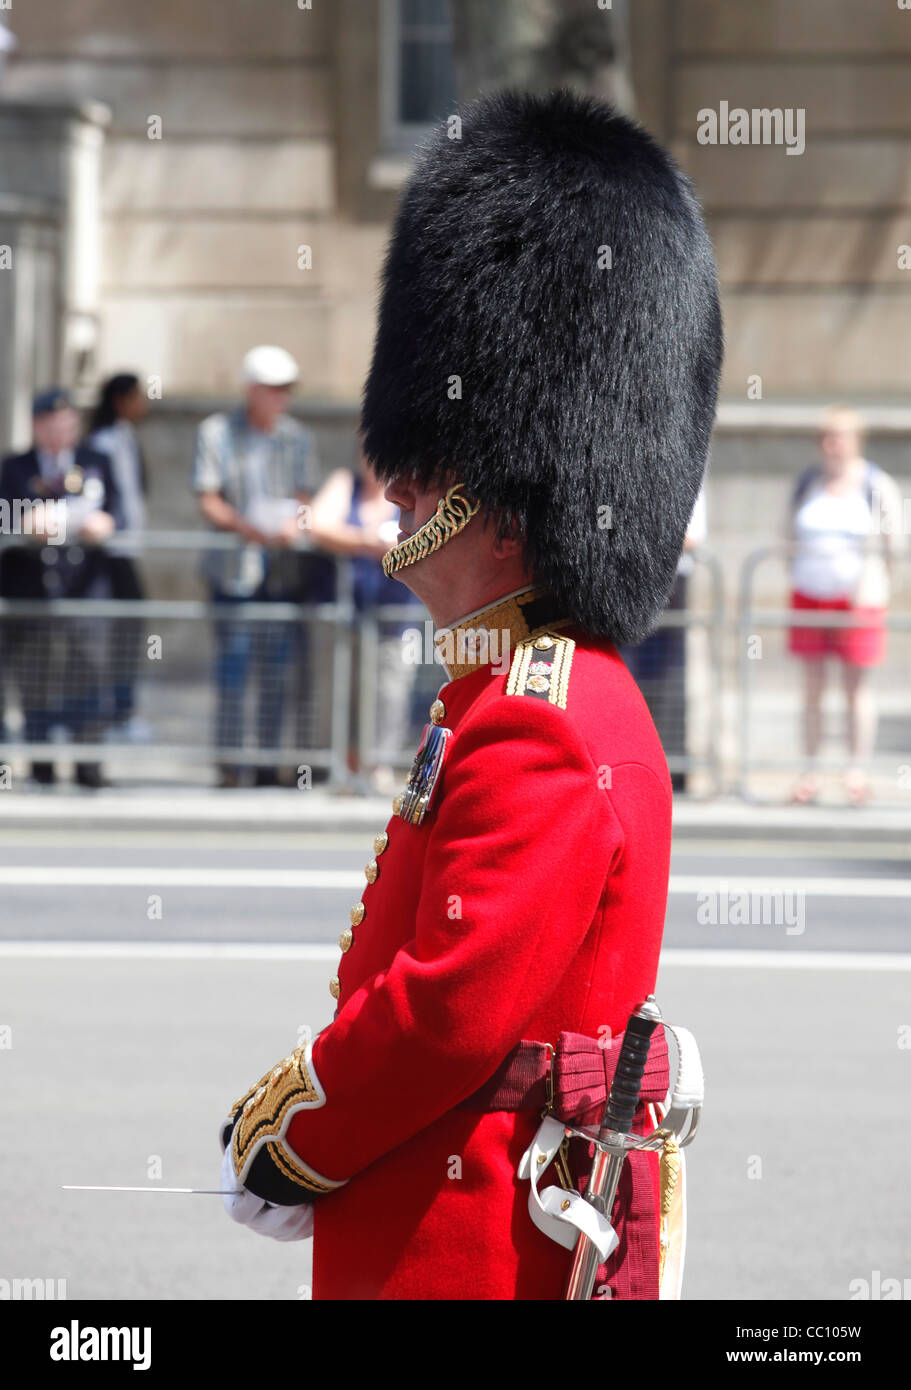 Military band wearing bearskin hats on Veterans' Day in London, England Stock Photo